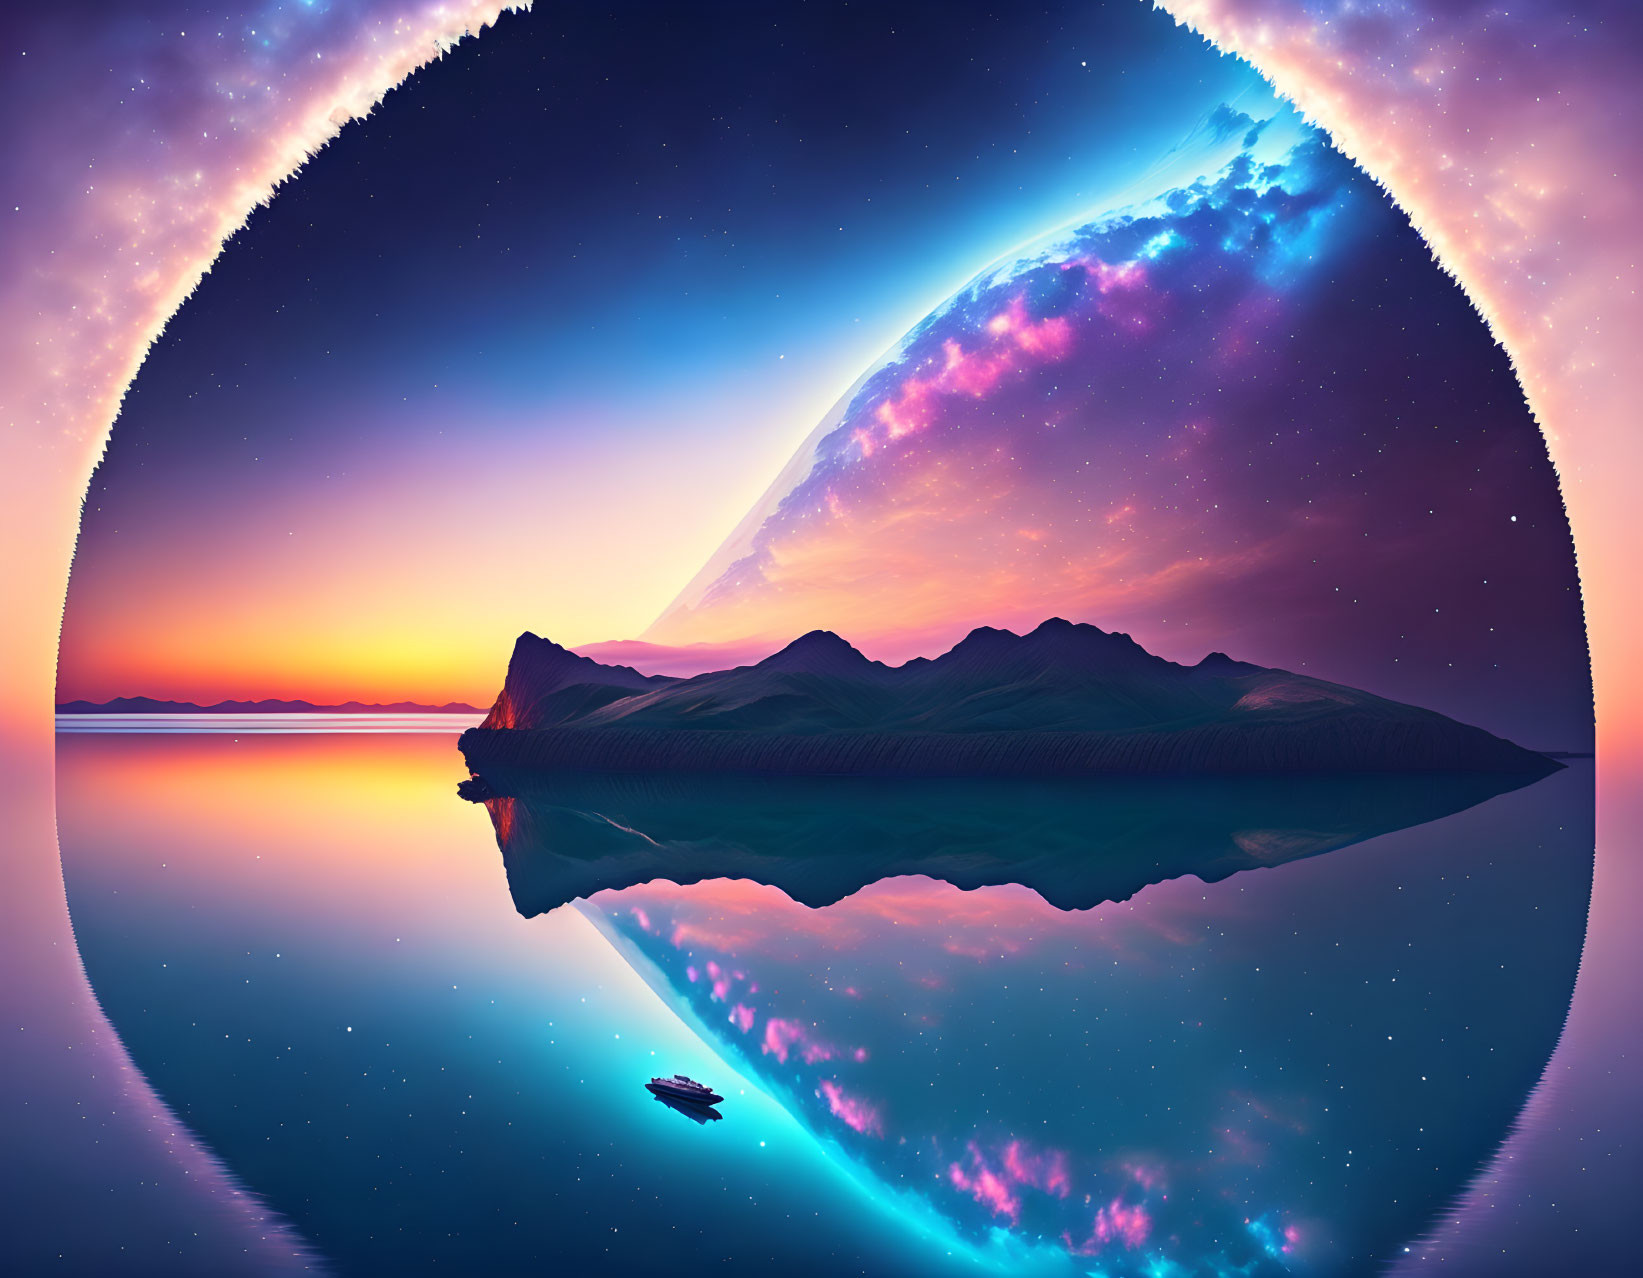 Mountainous island reflected in still waters under twilight sky with surreal planet rising